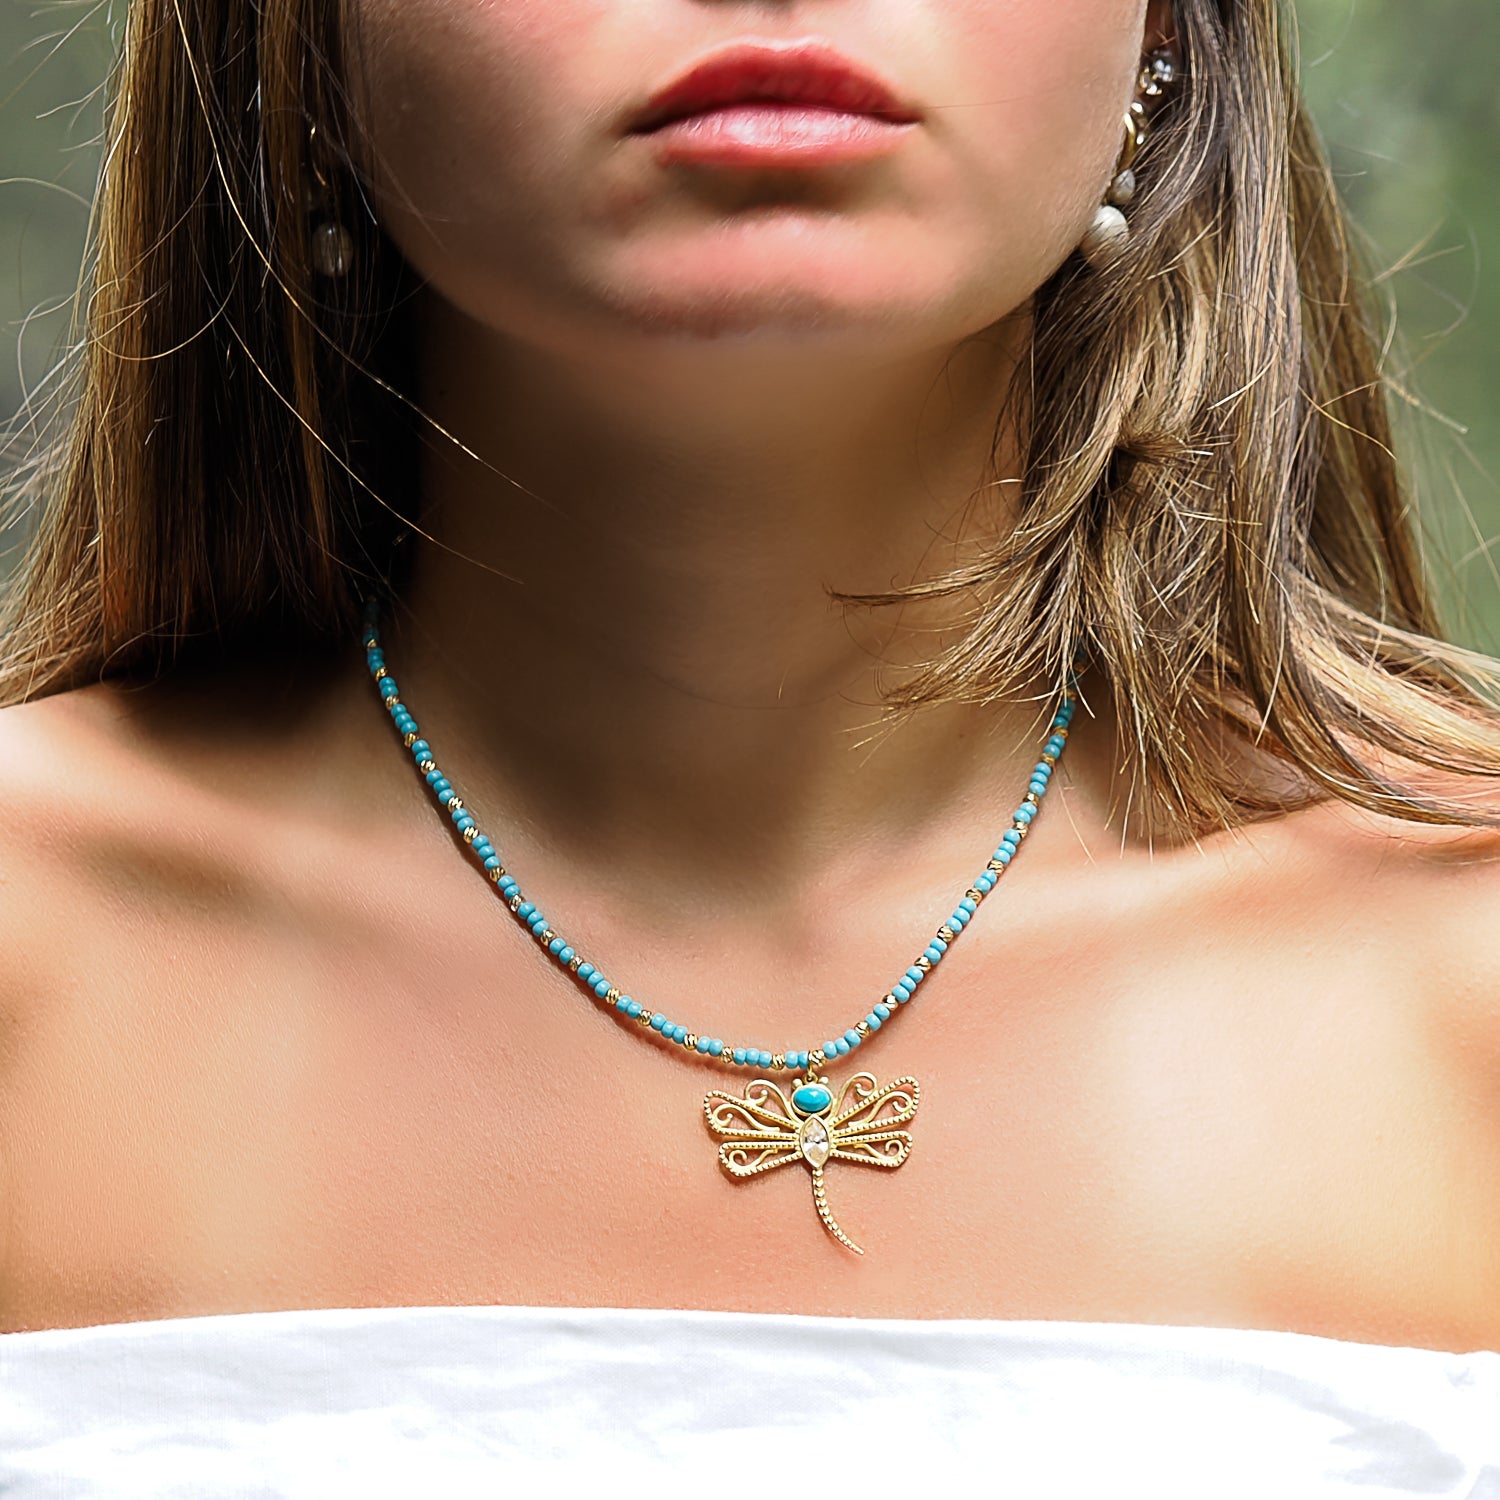 Radiate Tranquility - Model Wearing Turquoise Dragonfly Necklace.